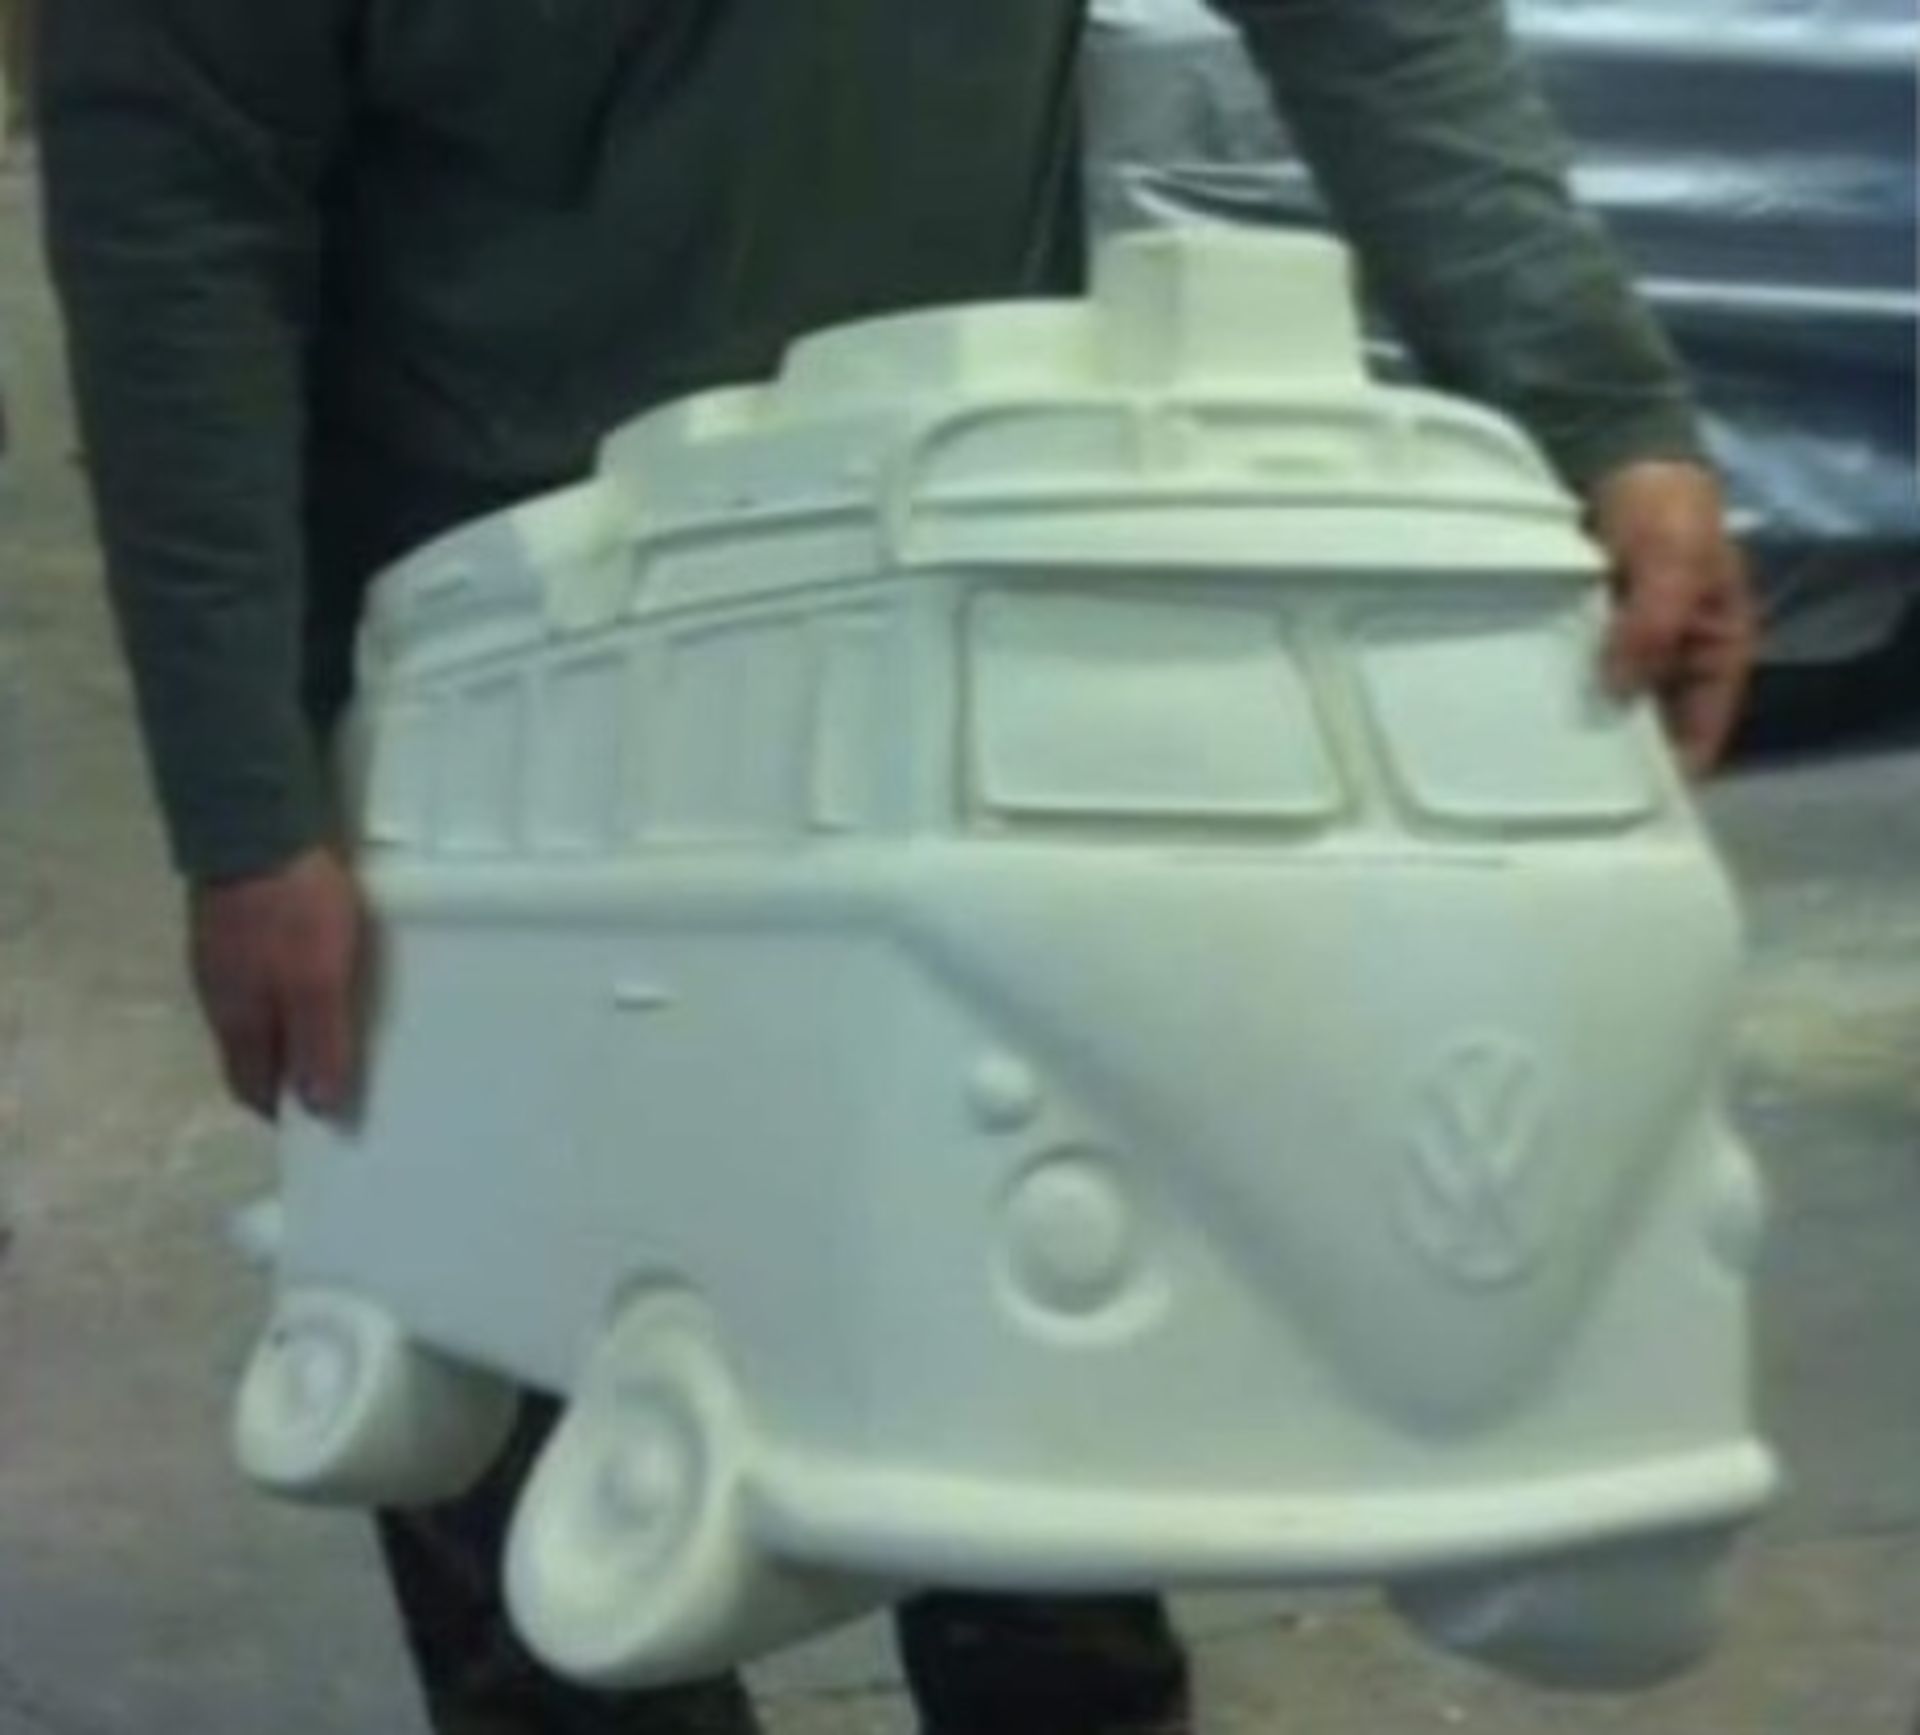 THREE VW AND JENSEN SIGN MAKING MOULDS (MOULDS ONLY) - Image 5 of 5